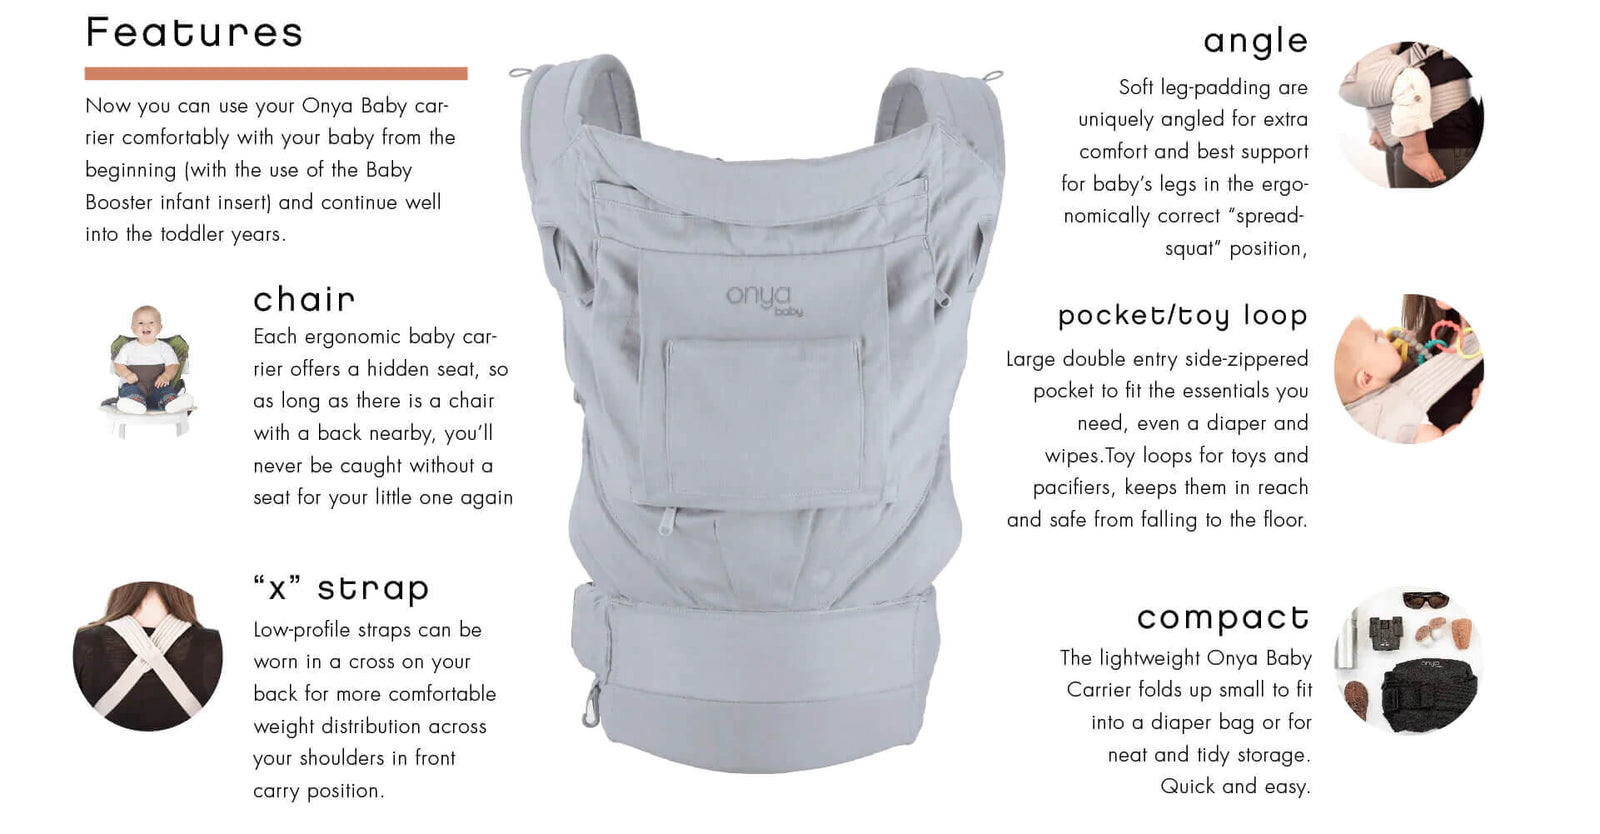 Product features display showing a list of features on the Onya Baby Cruiser Baby Carrier